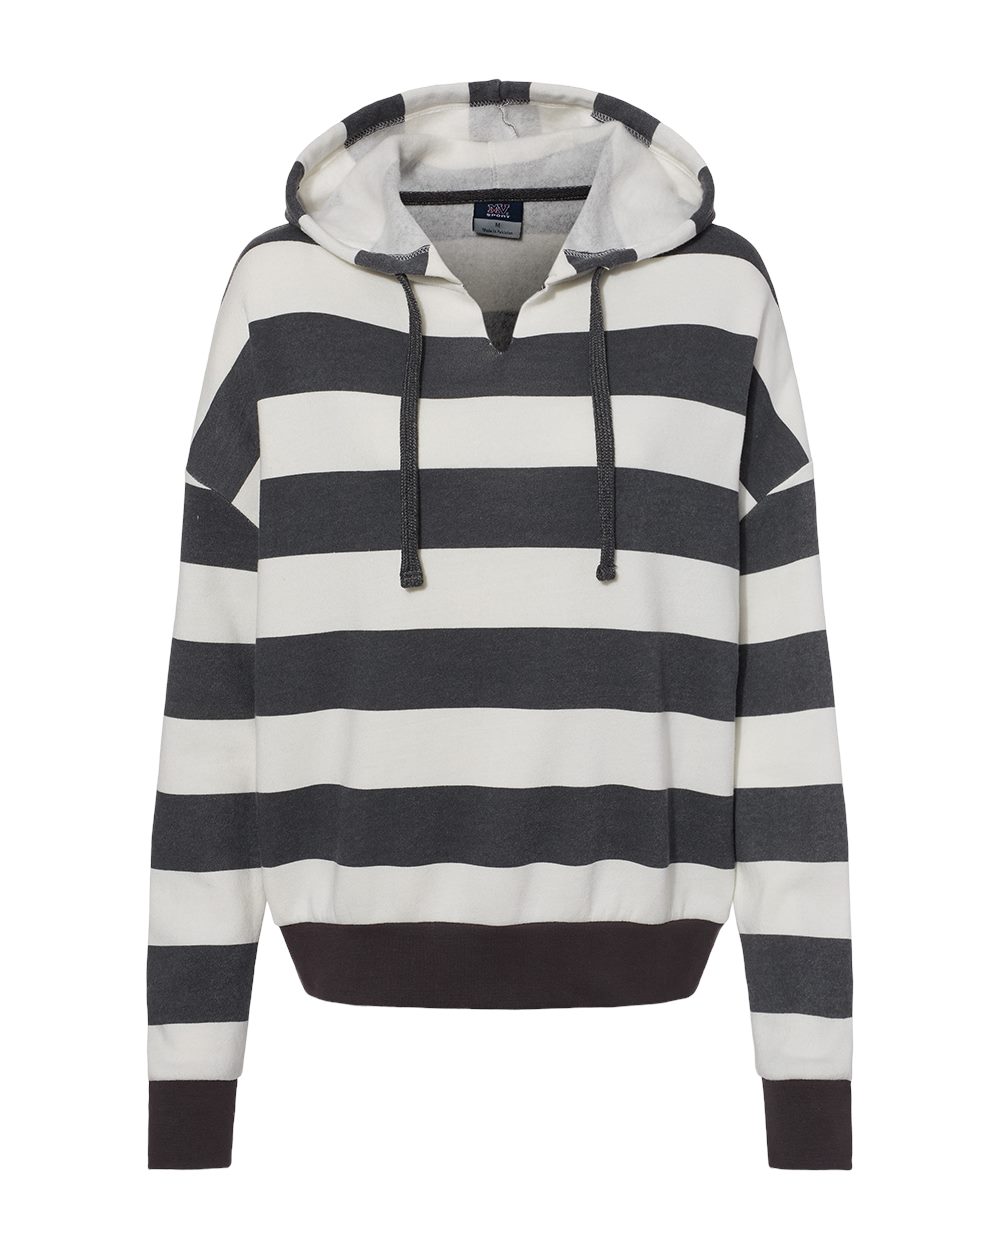 Multi-rve Details about   Indiweaves Boy Wool Striped Sweater